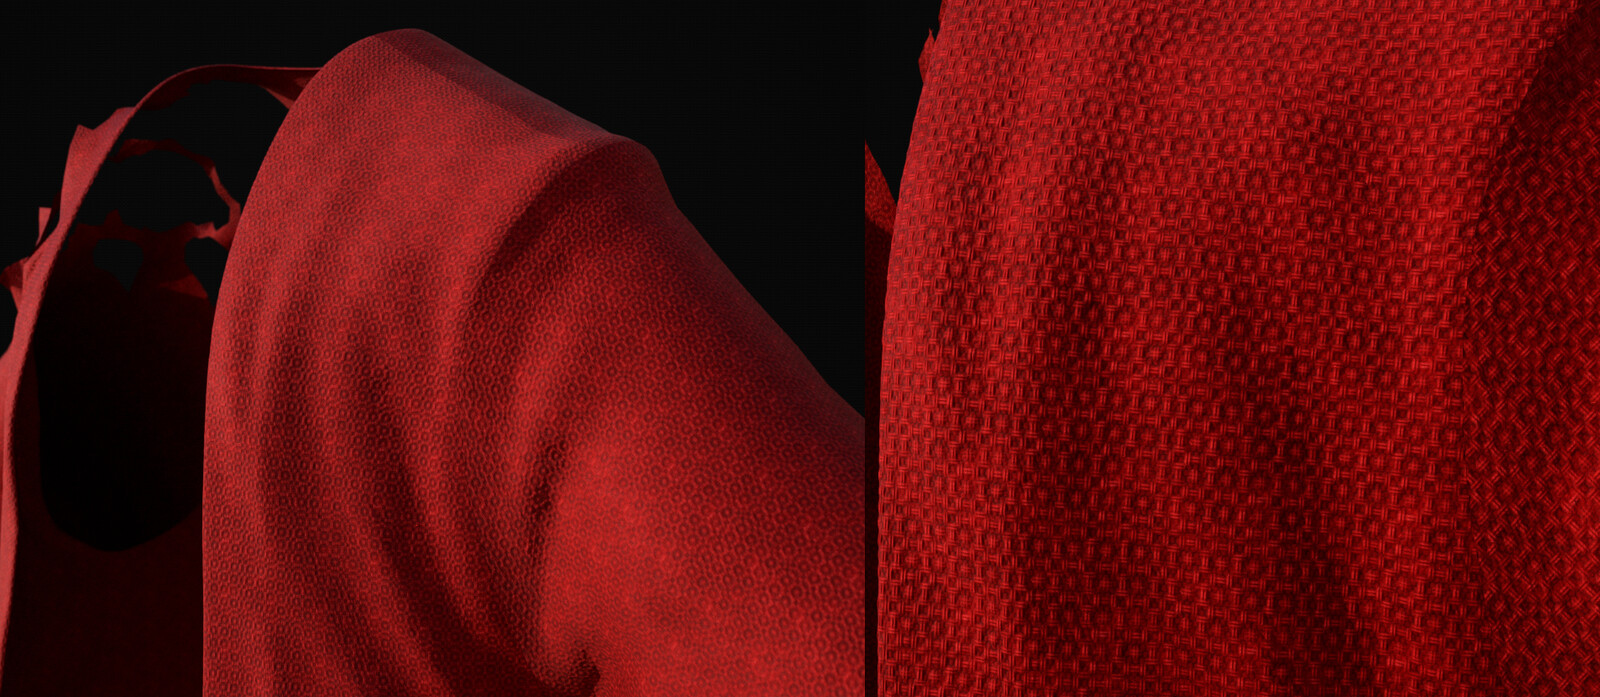 Substance Design + Painter for the Cloth/patterns.